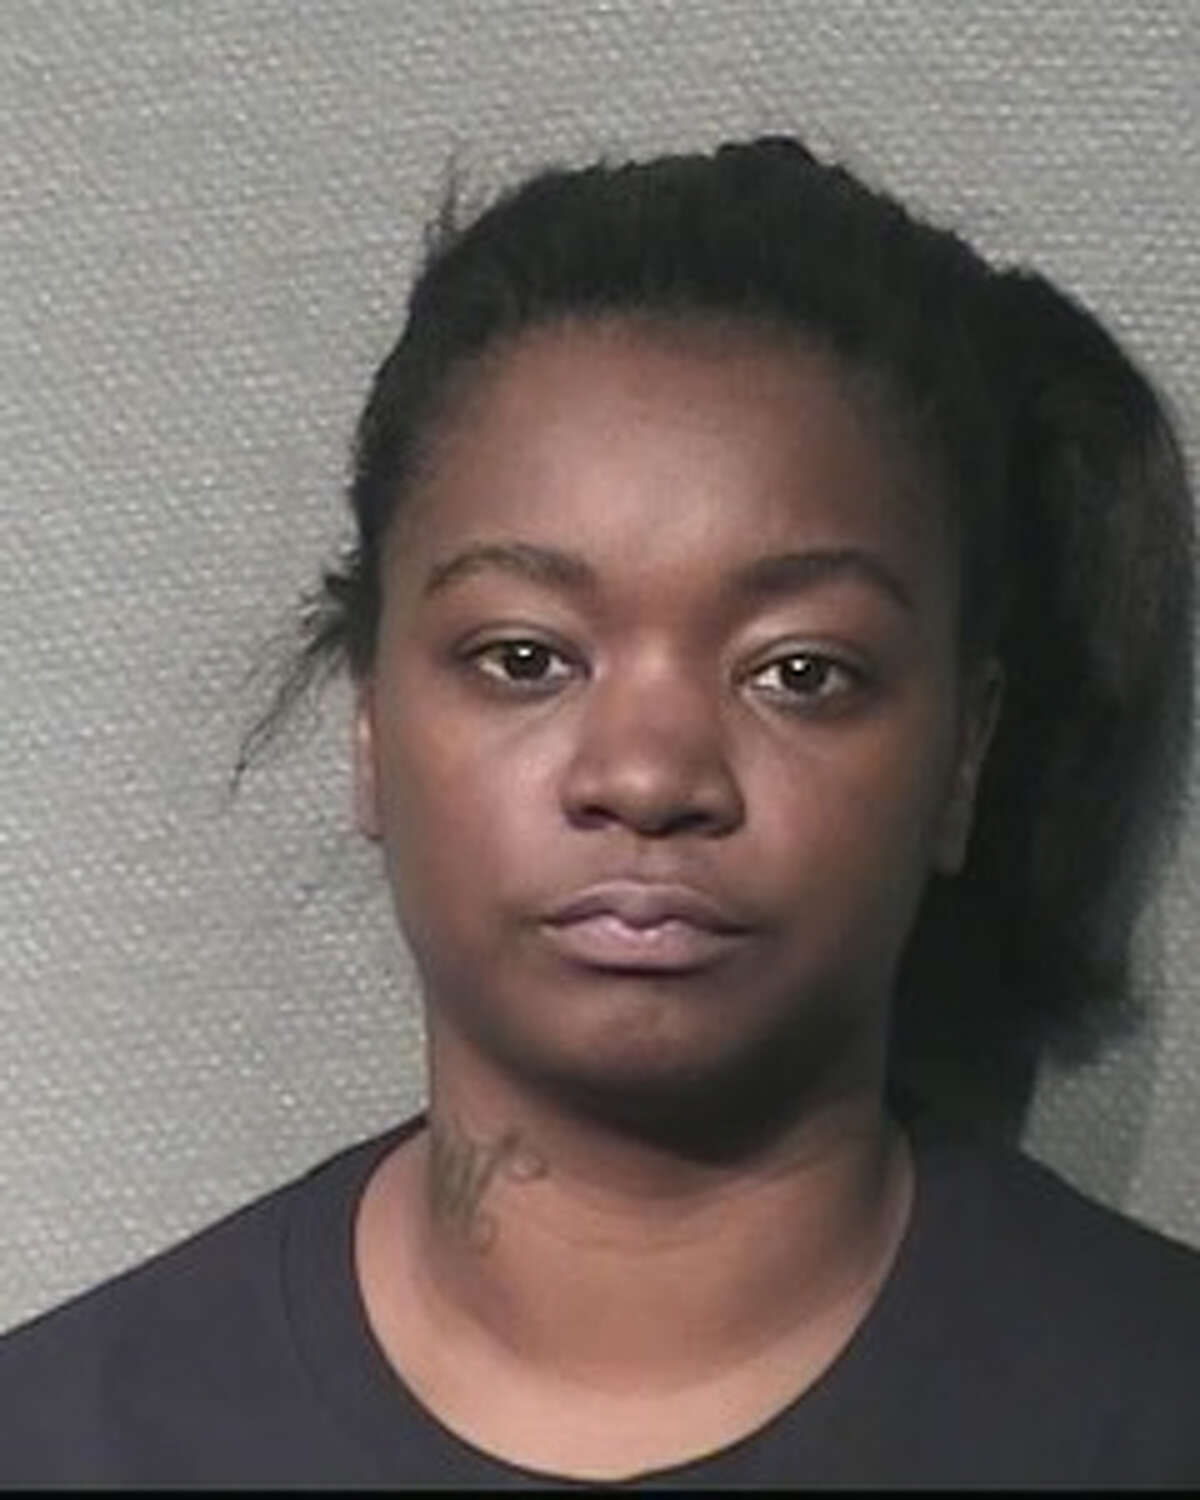 Police say Chevy Tahoe driver Tawana Atkins was driving along Tidwell in the early morning hours of April 27, 2017 when she struck Reginald Lauderdale, who was riding a bicycle. She drove away, but left behind pieces of her car